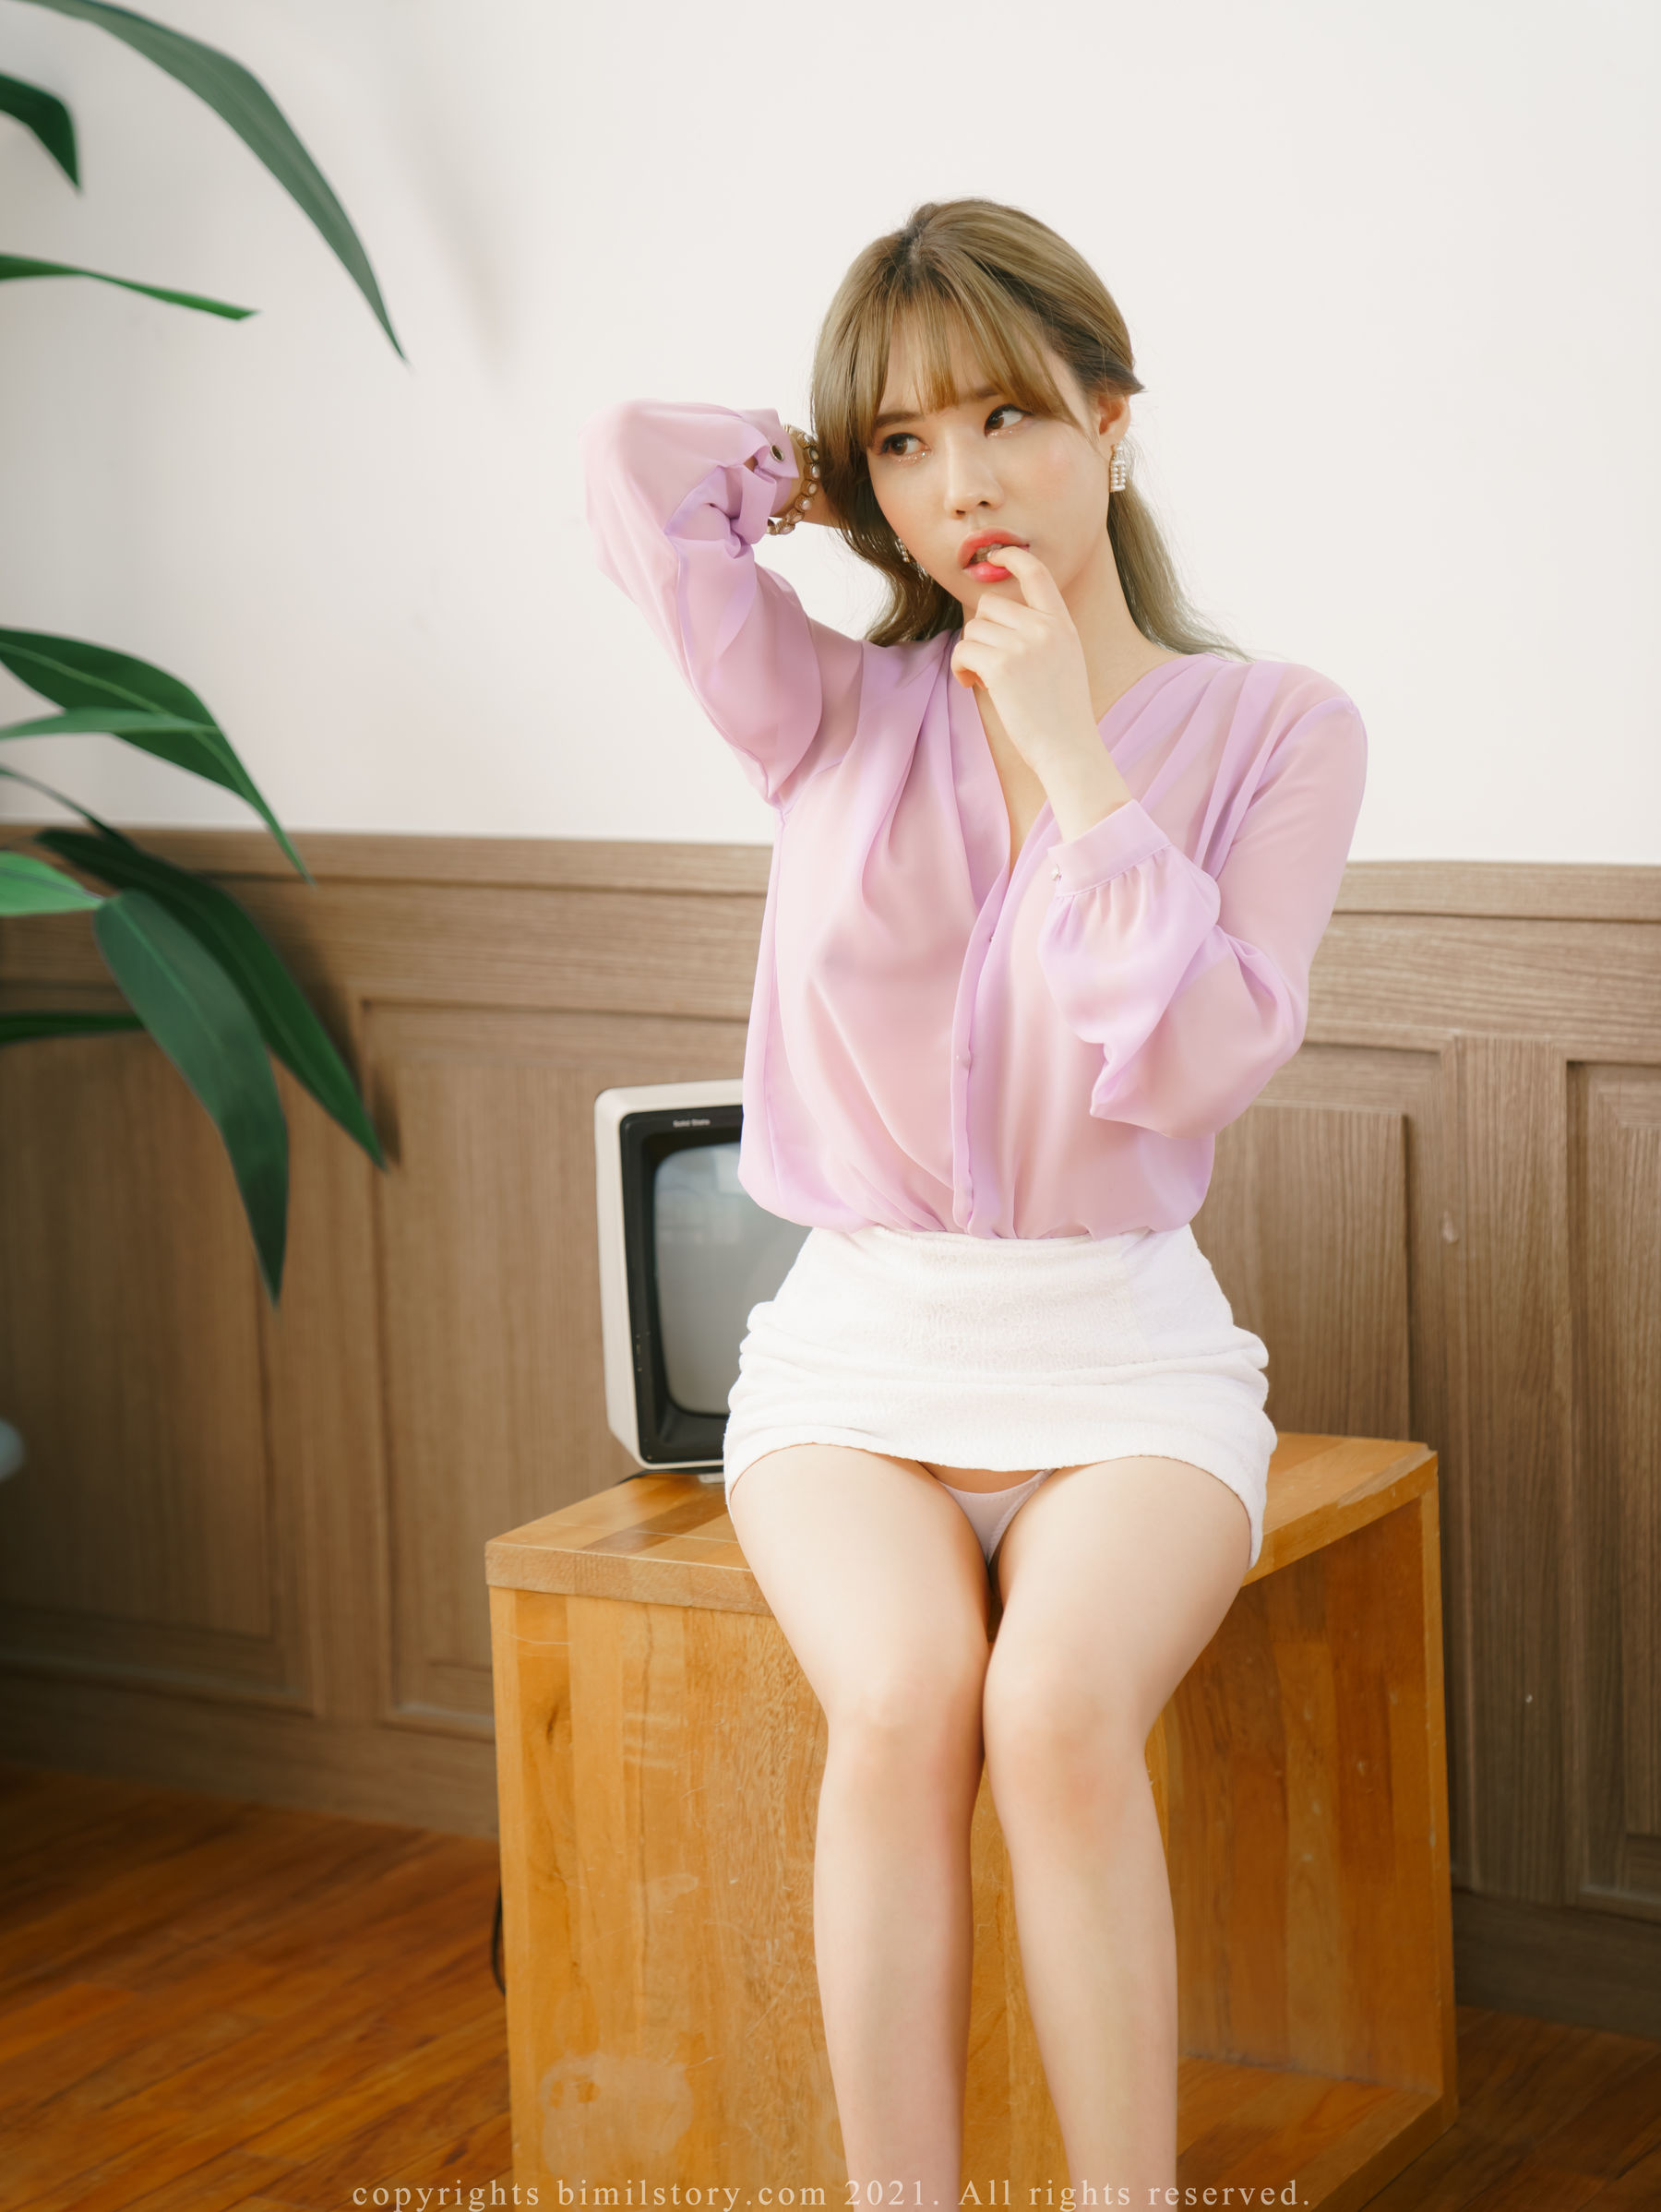 [Bimilstory] Eunha 2023.04.04 Vol.04 How to dress in case of F cup size woman  第7张